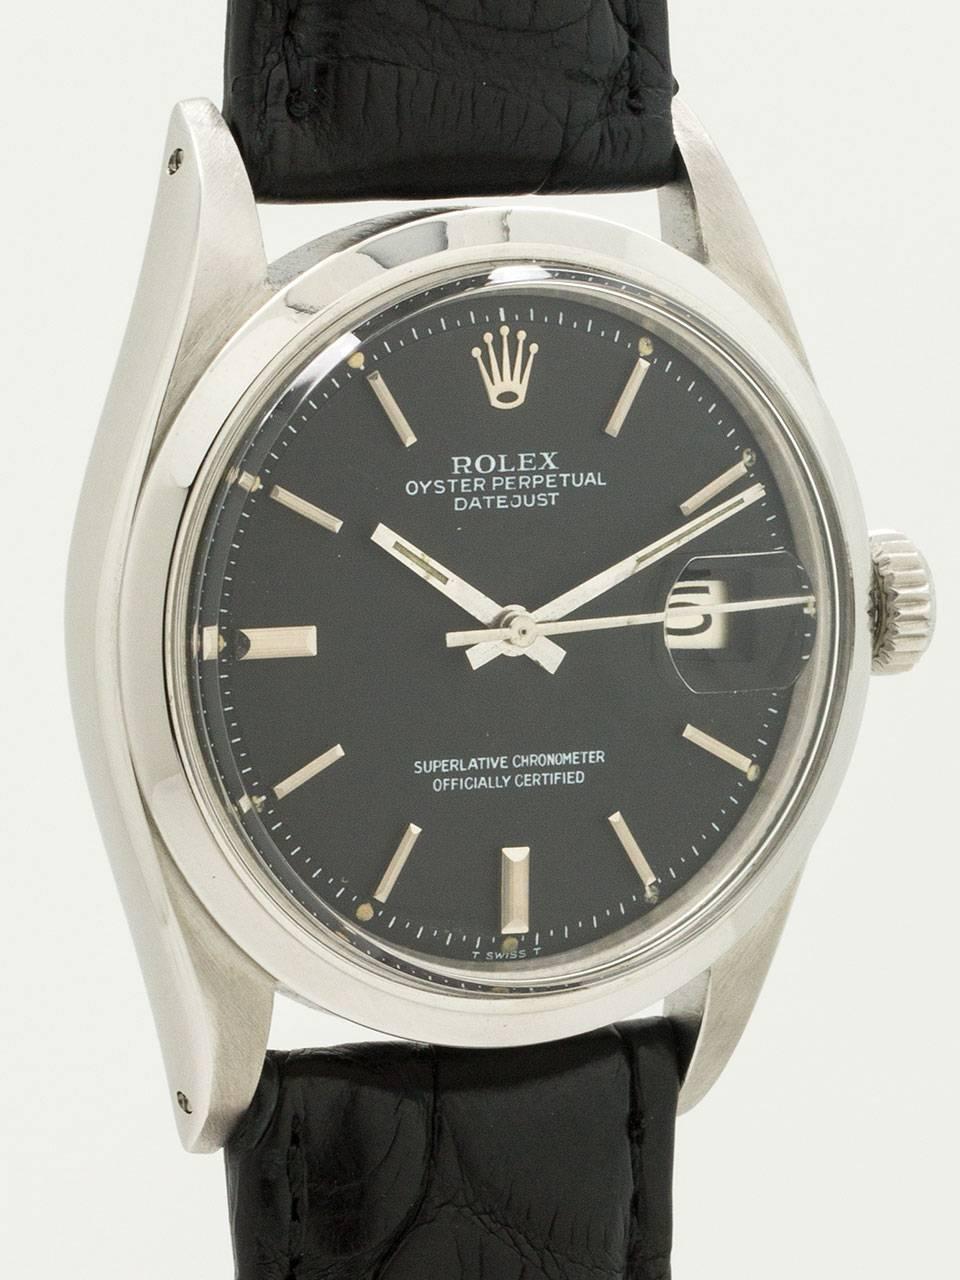 
Rolex Datejust ref 1600 stainless steel case with beautiful condition black original pie an dial with applied silver indexes and silver baton hands, serial # 3.9 million circa 1974. Powered by self winding chronometer rated caliber 1570 with sweep